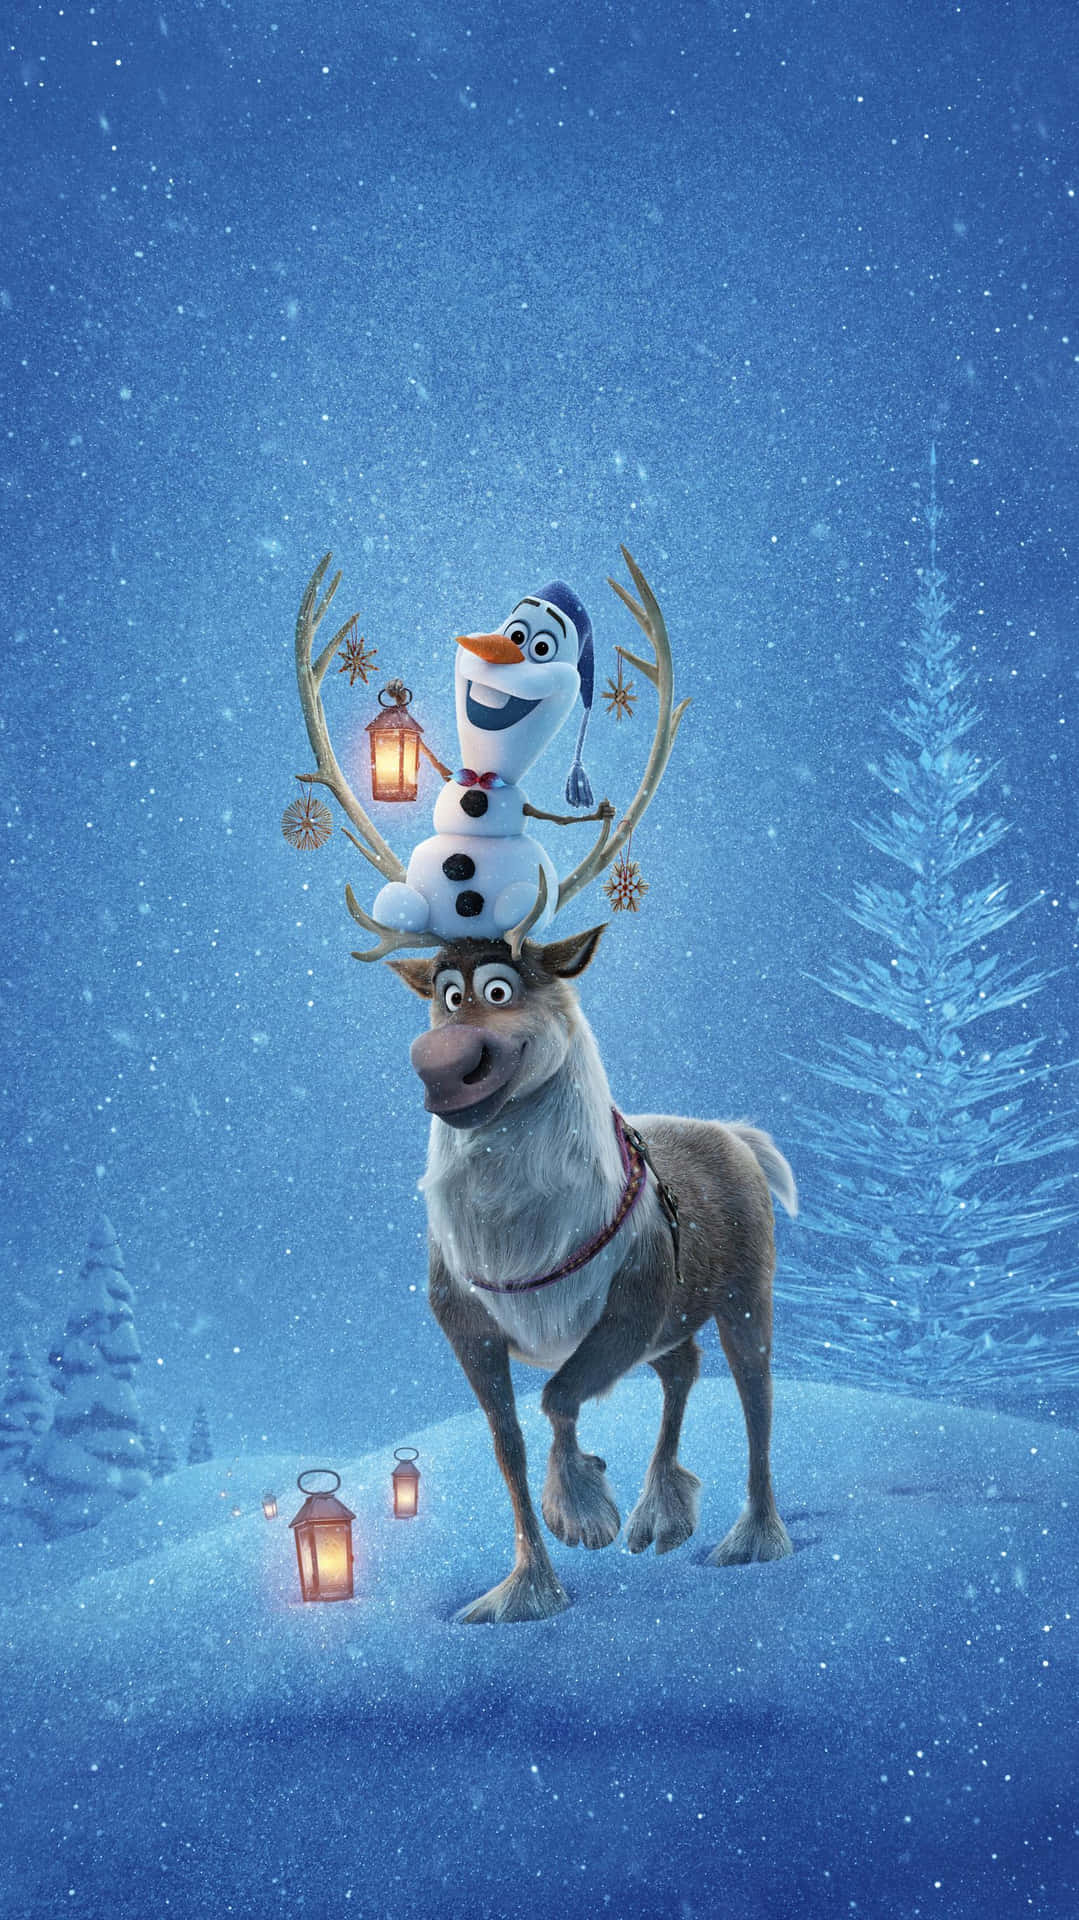 Olaf And Olaf In Frozen Wallpaper